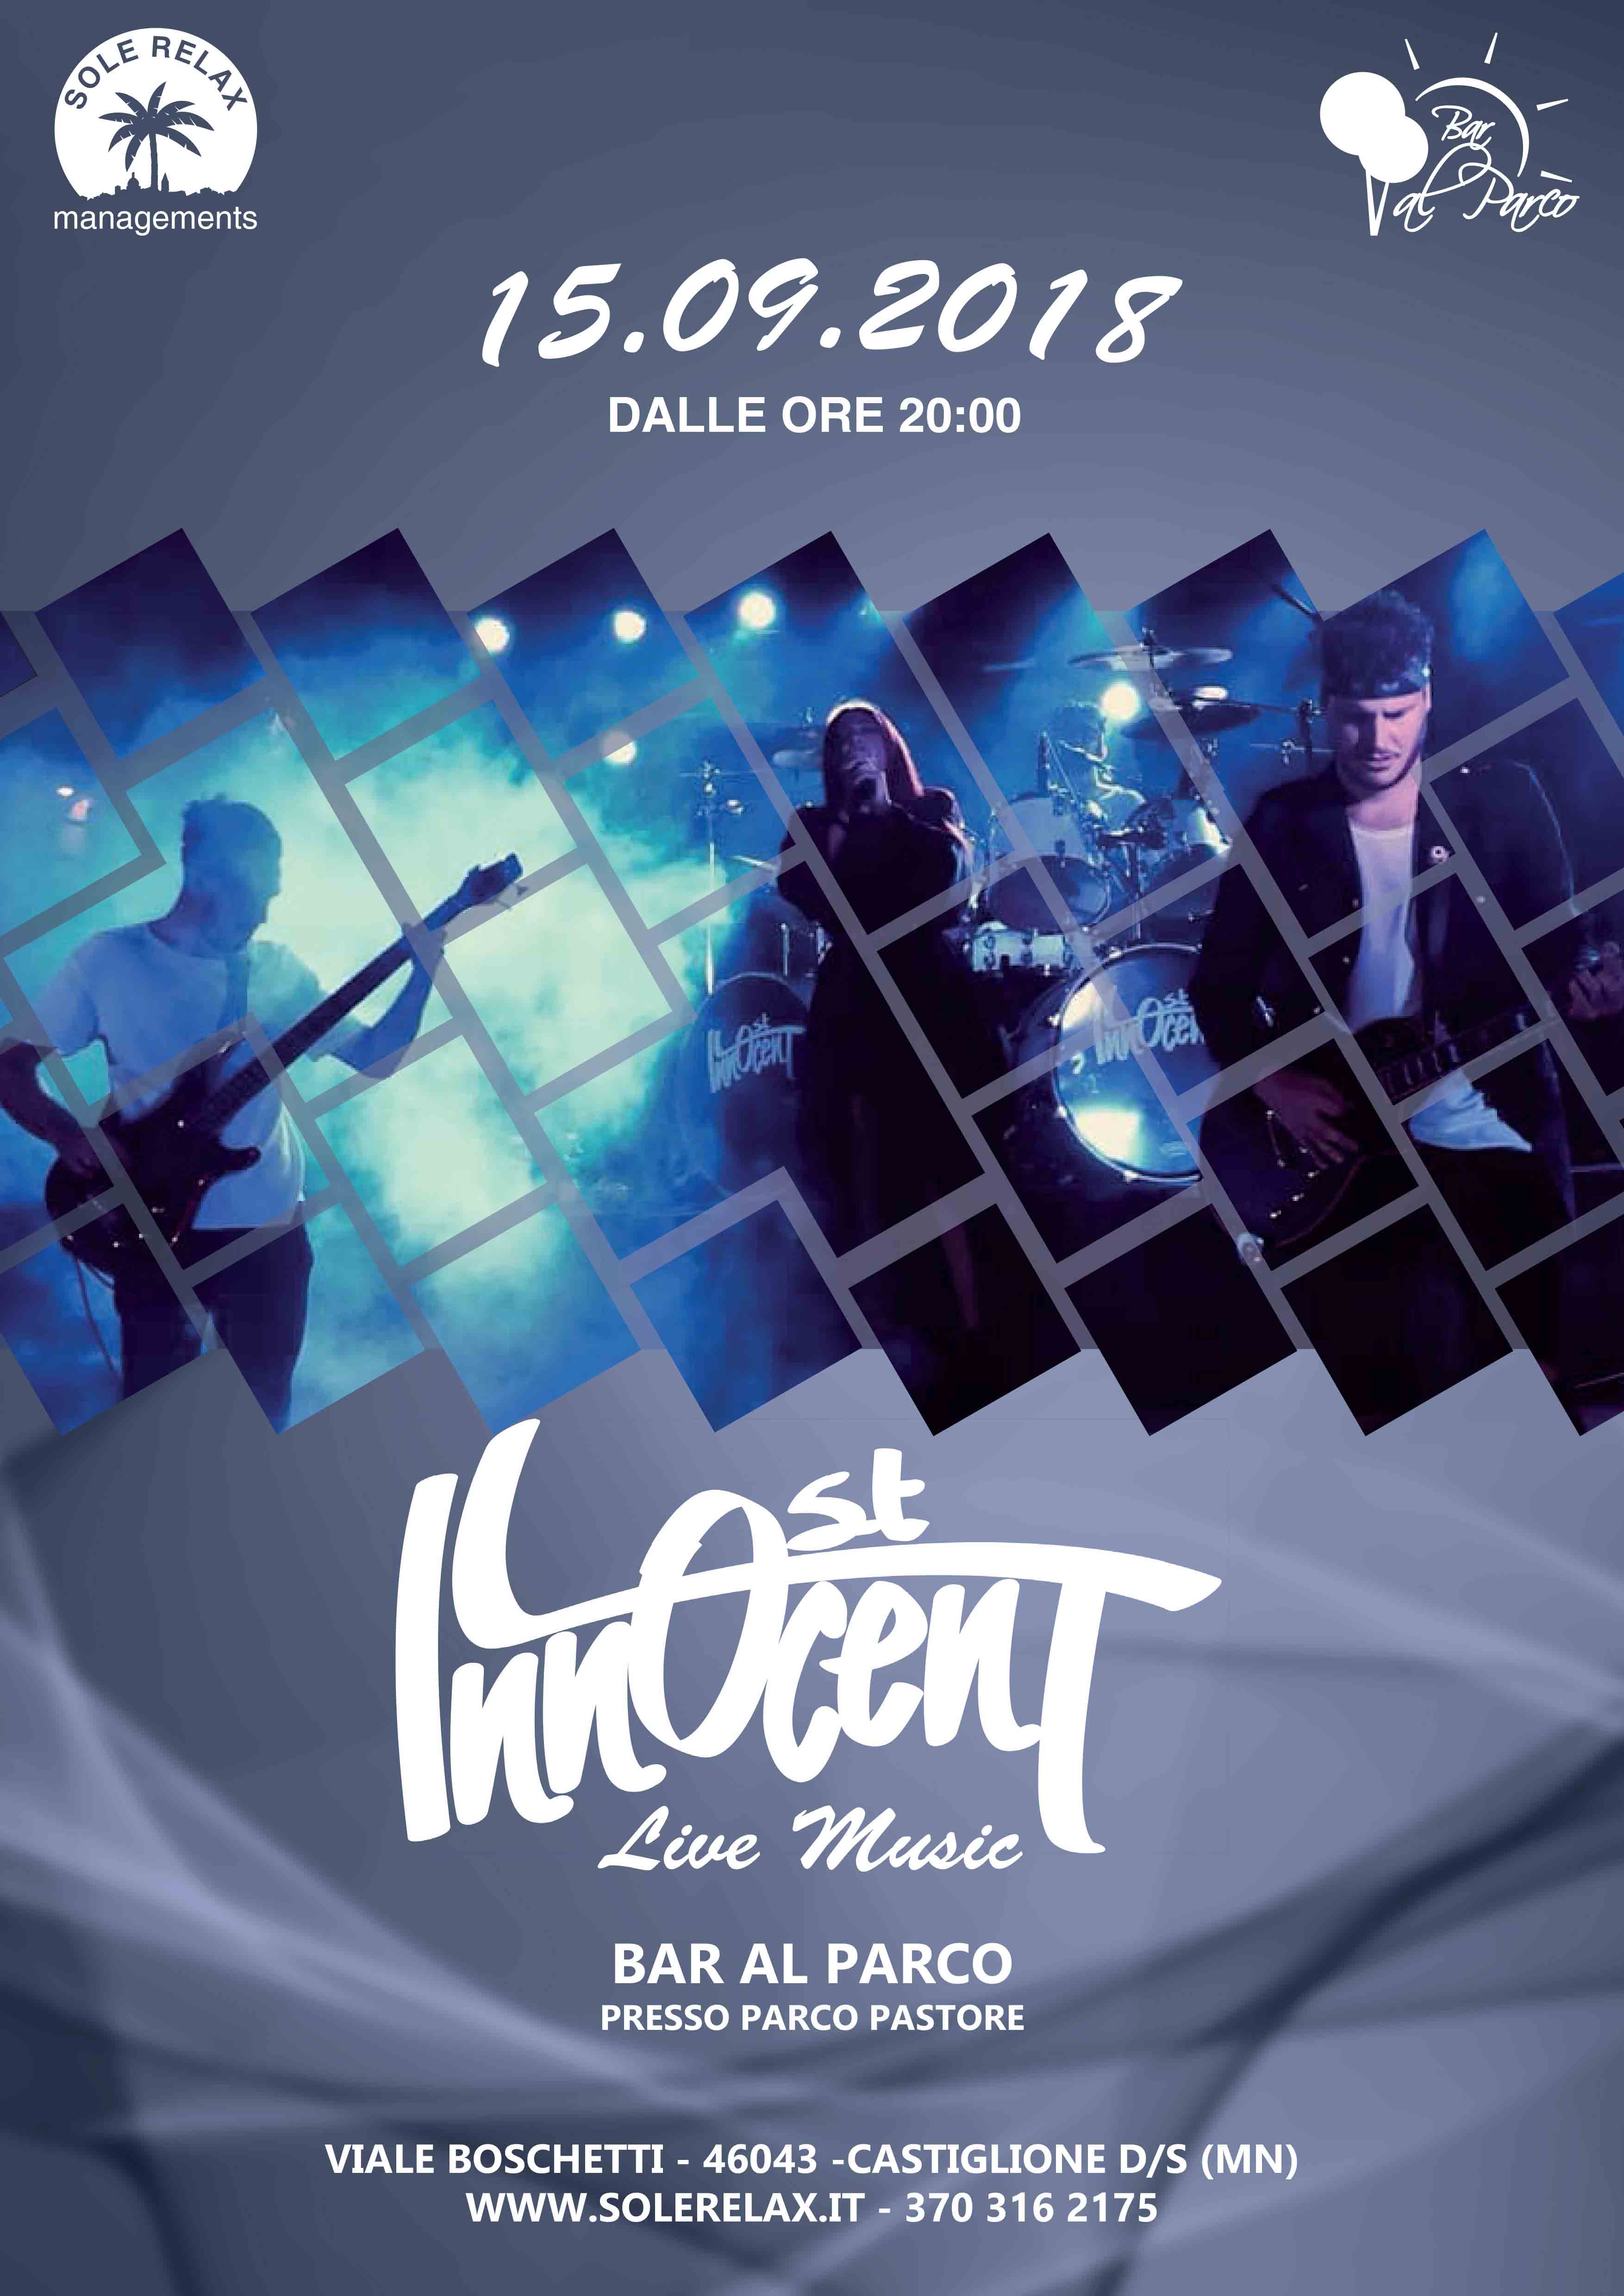 Lost Innocent - Live Music - Bar al Parco - Sole Relax